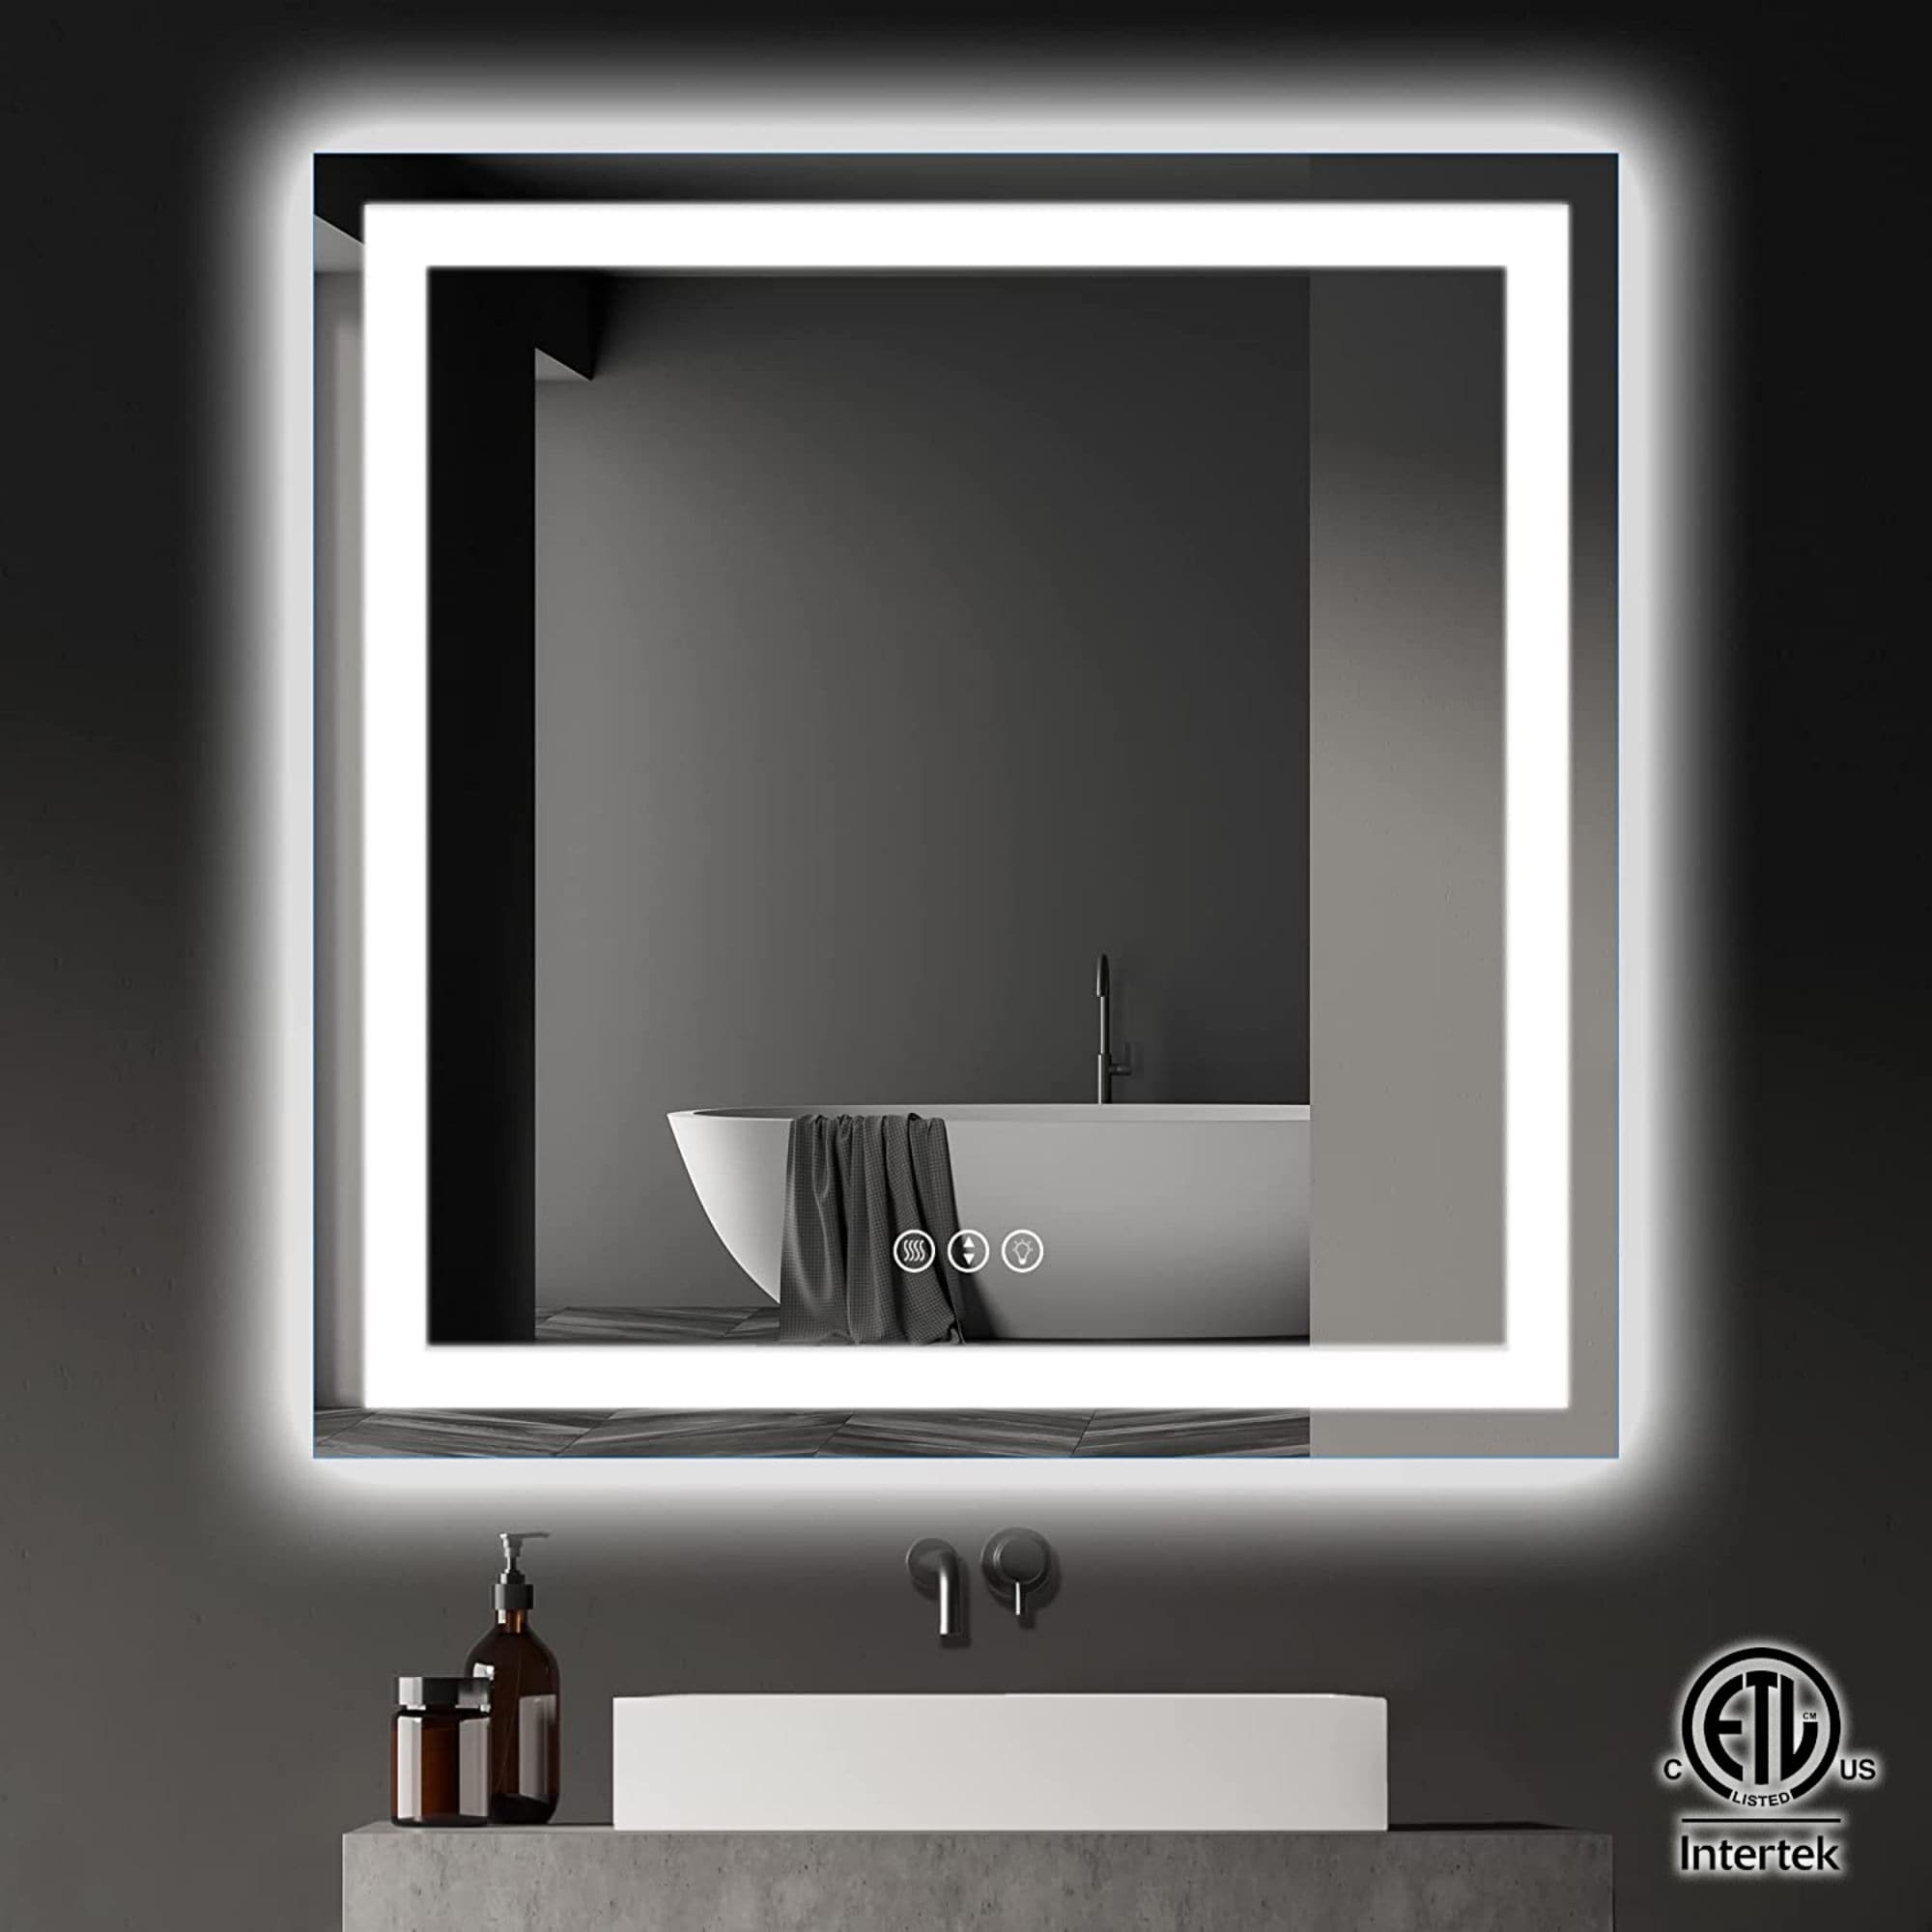 https://ak1.ostkcdn.com/images/products/is/images/direct/5f0ebdd099ad77e6fb8e13a8970b0897f7f0c792/Toolkiss-Rectangular-Frameless-Vanity-Mirror-with-Backlit-and-Front-Light.jpg